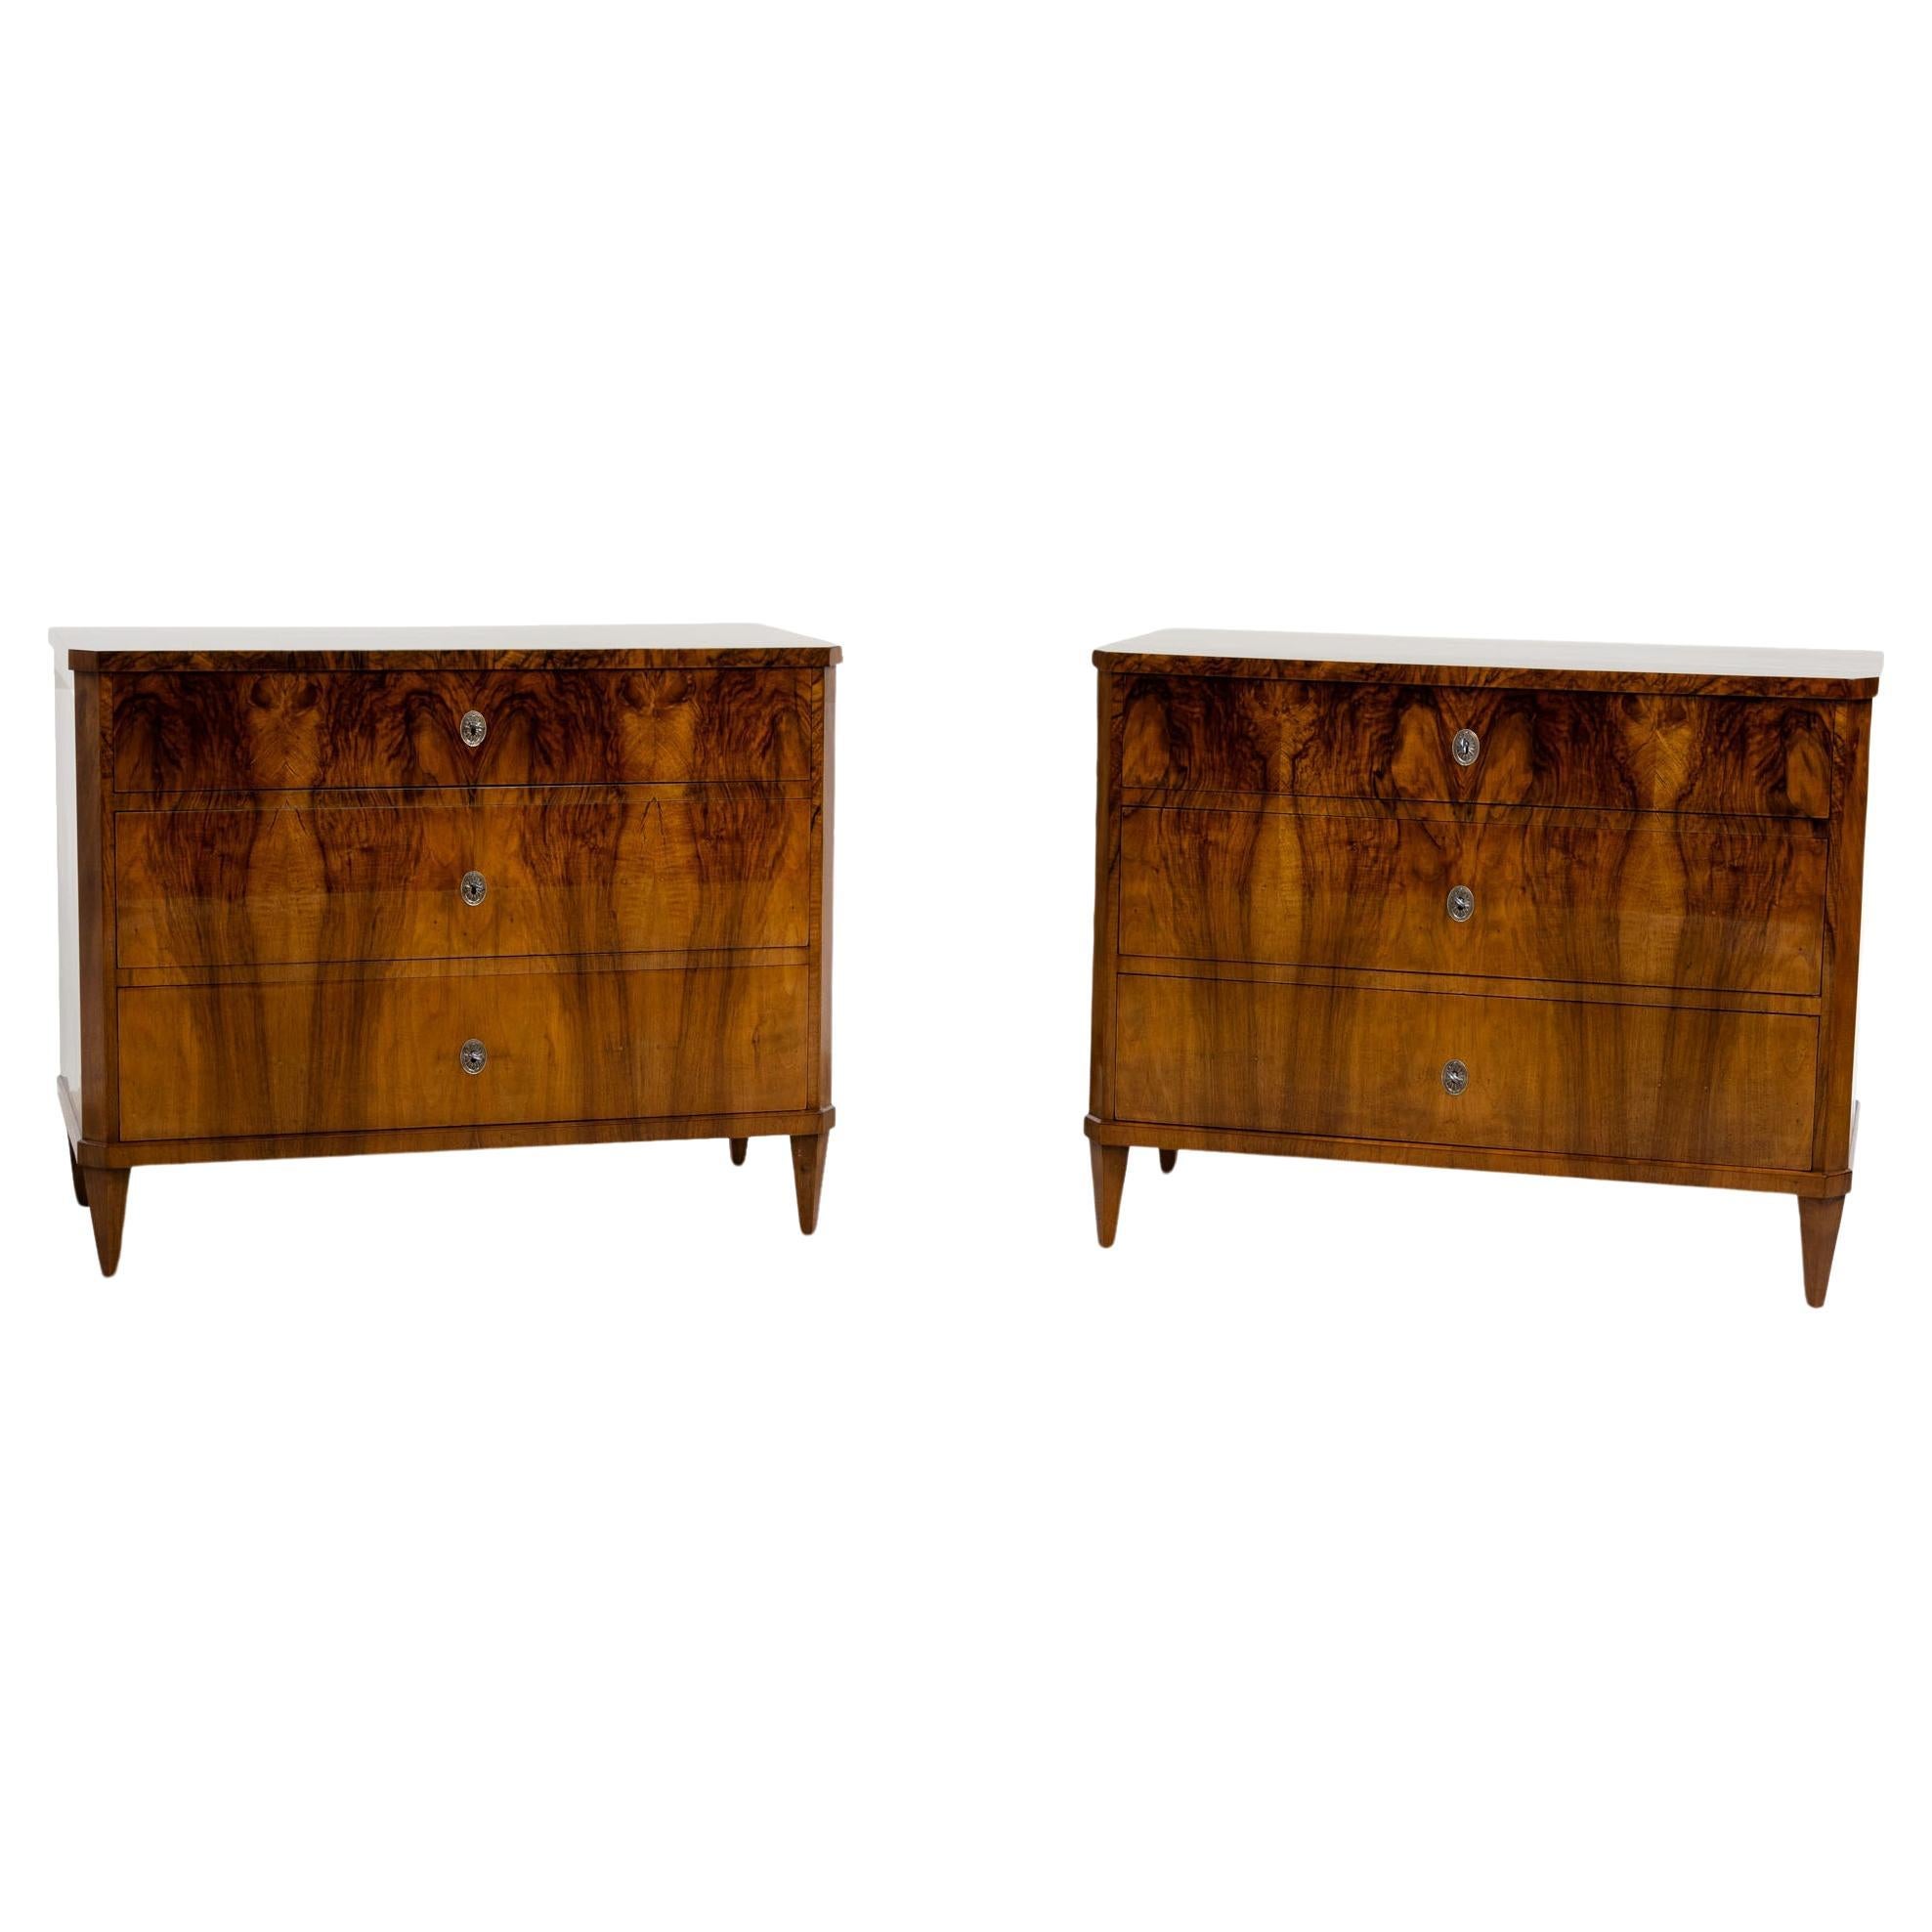 Pair of Biedermeier Walnut Chests of Drawers, Italy, early 19th Century